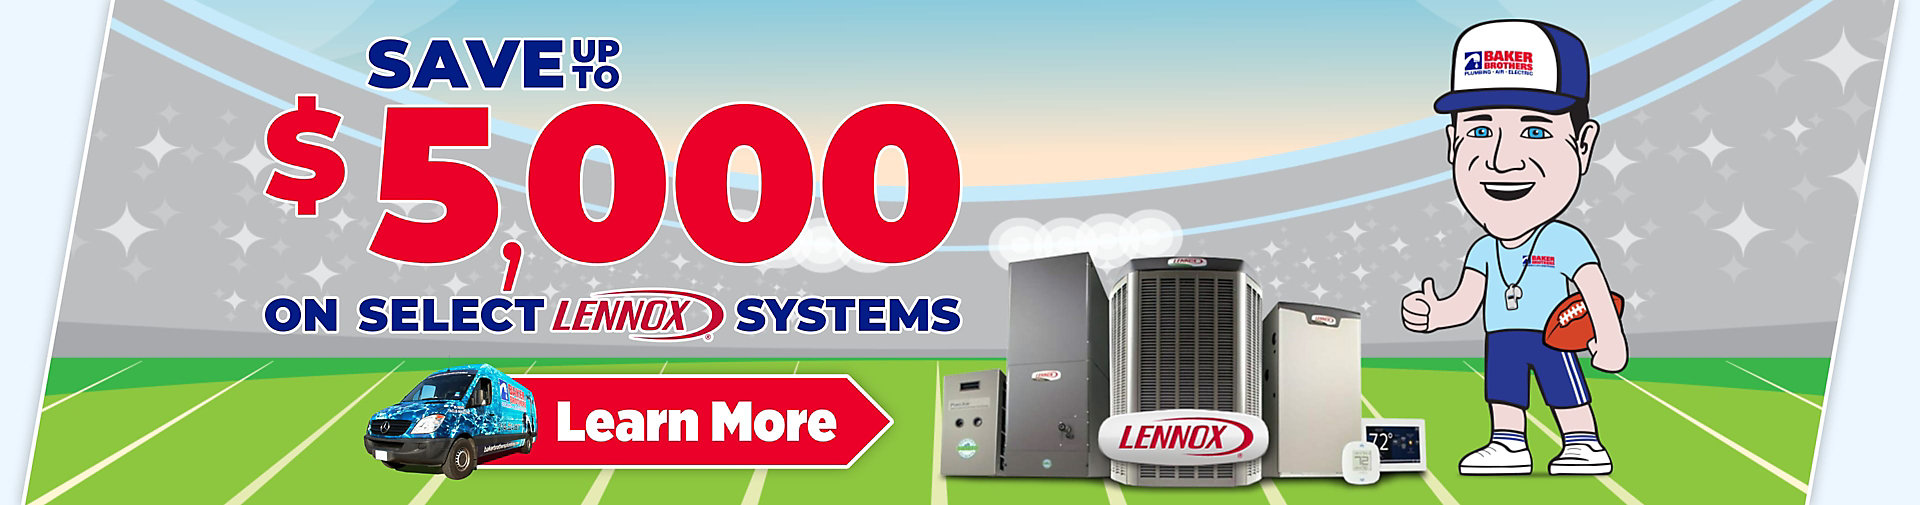 Get Up To $5,000 Off Select Lennox Systems